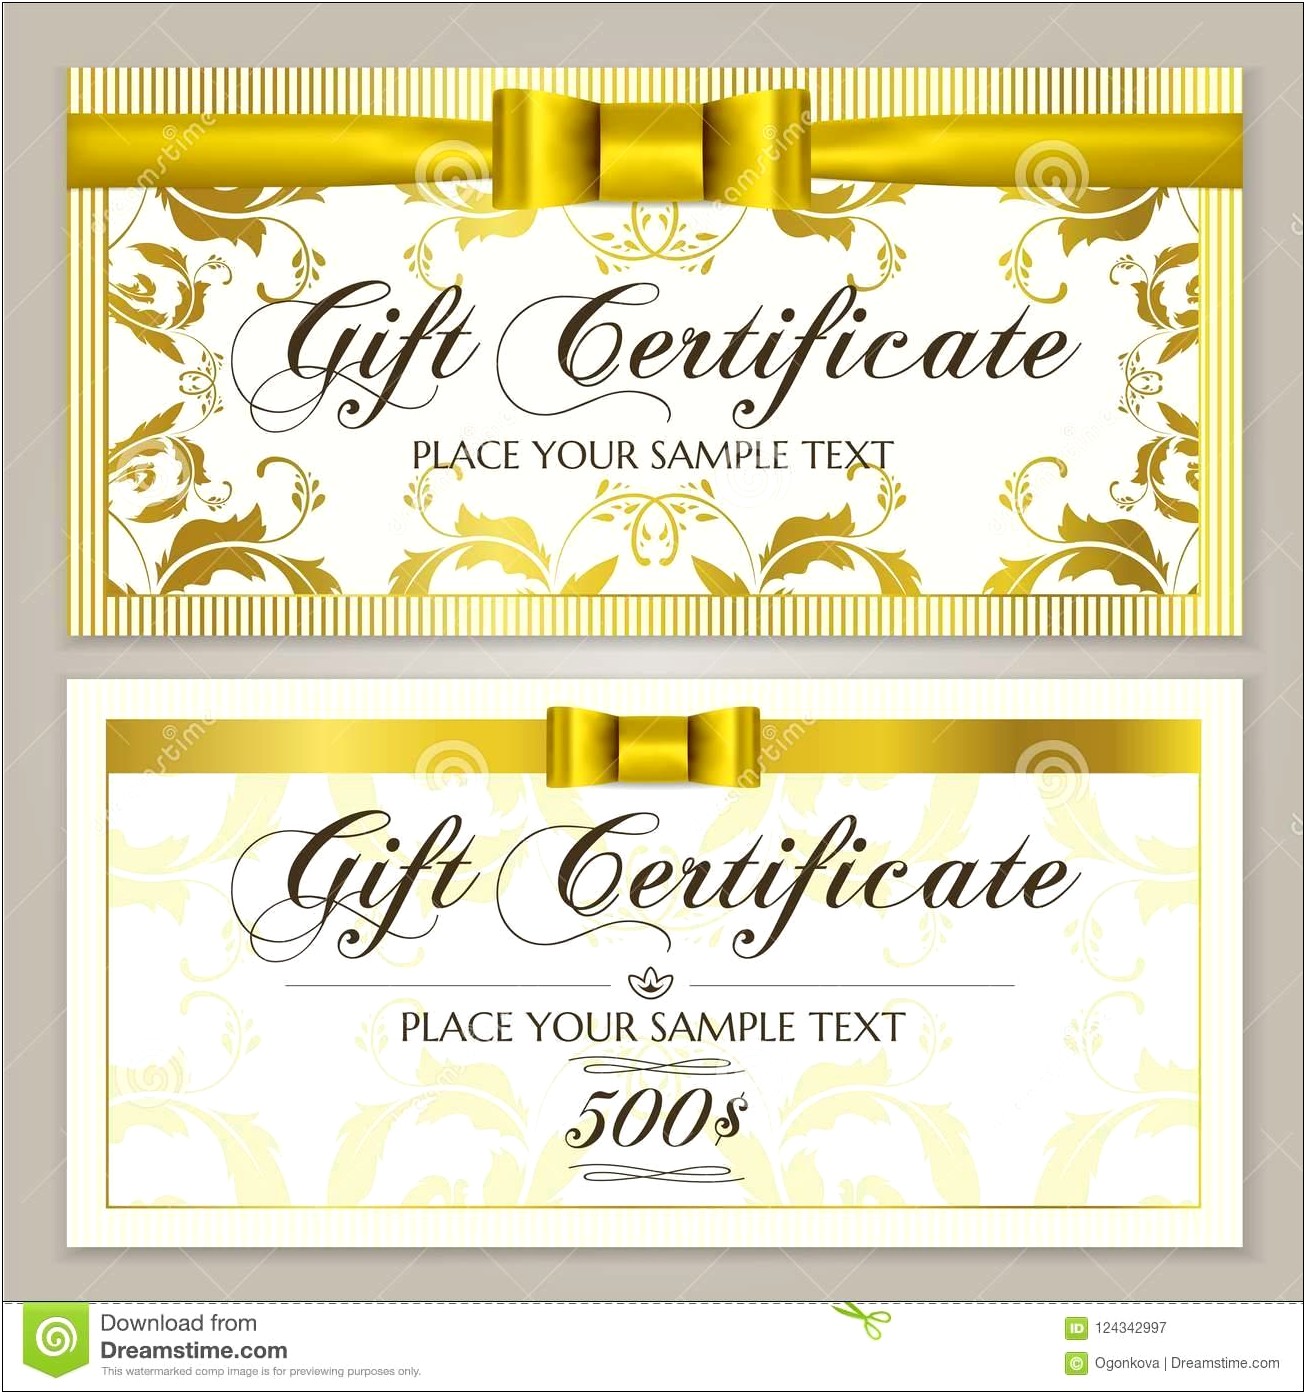 Free Downloads For Gift Certificate Templates